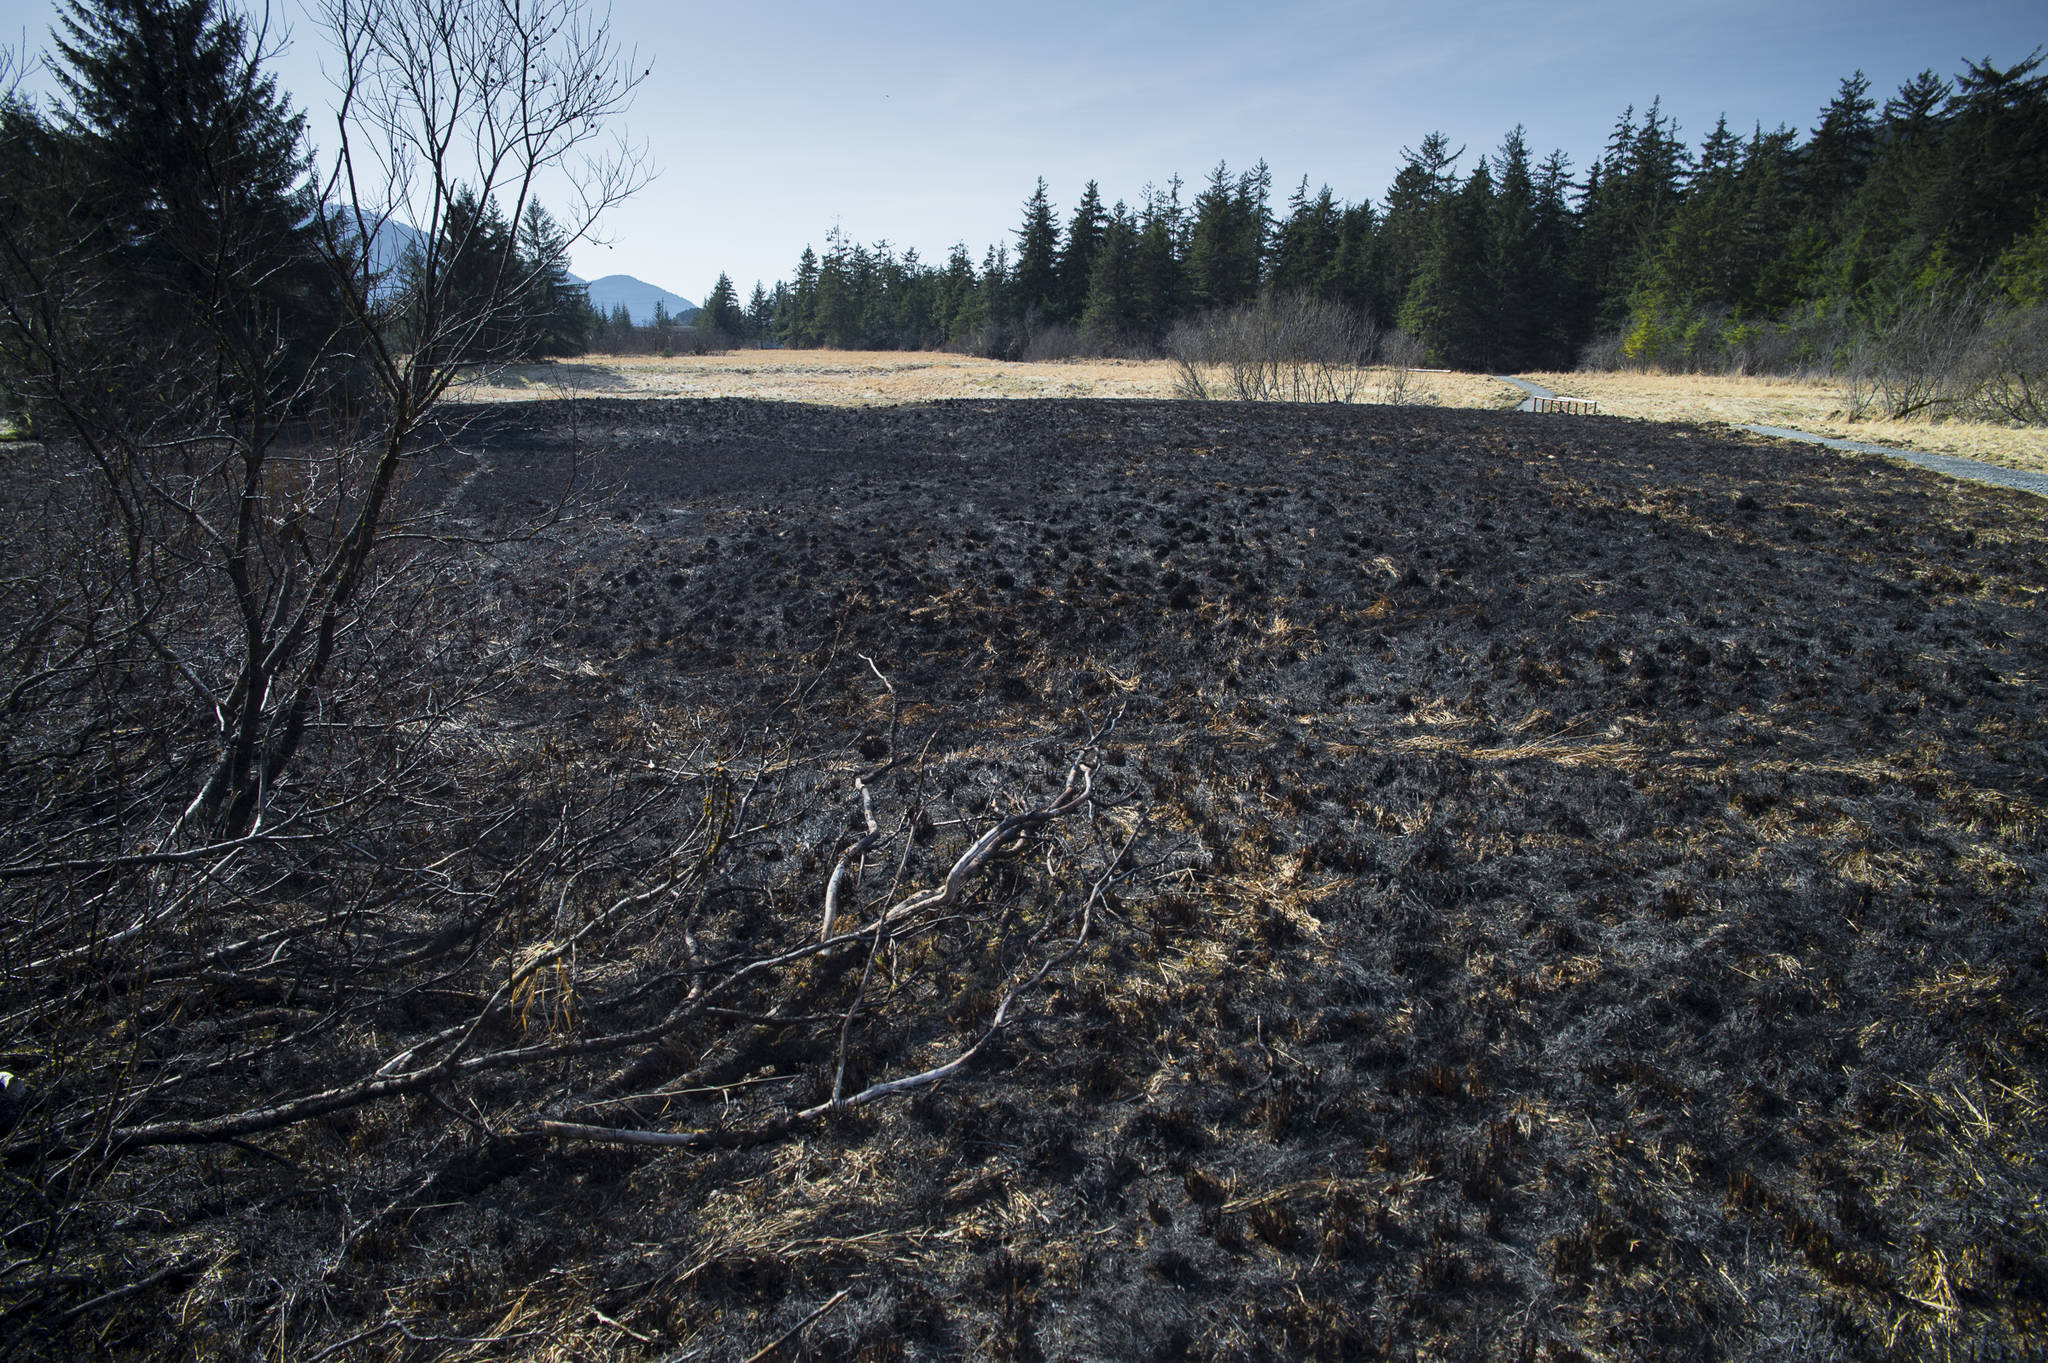 A 400-foot by 400-foot area of burned grass area next to the Davis Meadows Trail in Switzer Creek on Tuesday, April 2, 2019. The fire was reported on Sunday, March 31, and put out by Capital City Fire/Rescue. (Michael Penn | Juneau Empire)